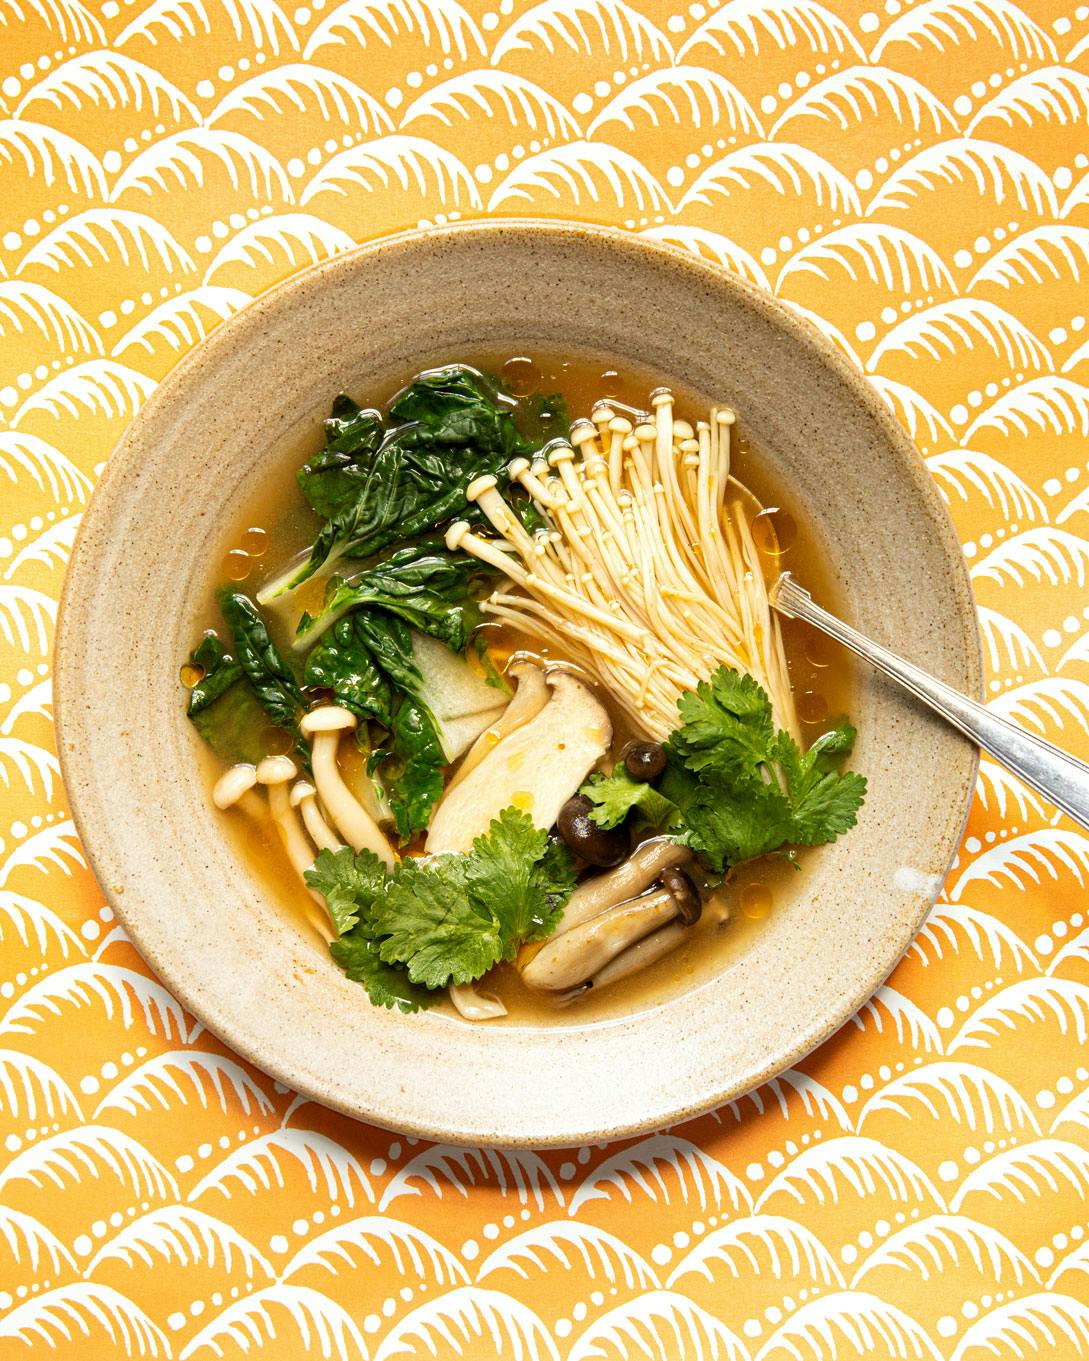 tom yum soup on yellow patterned background